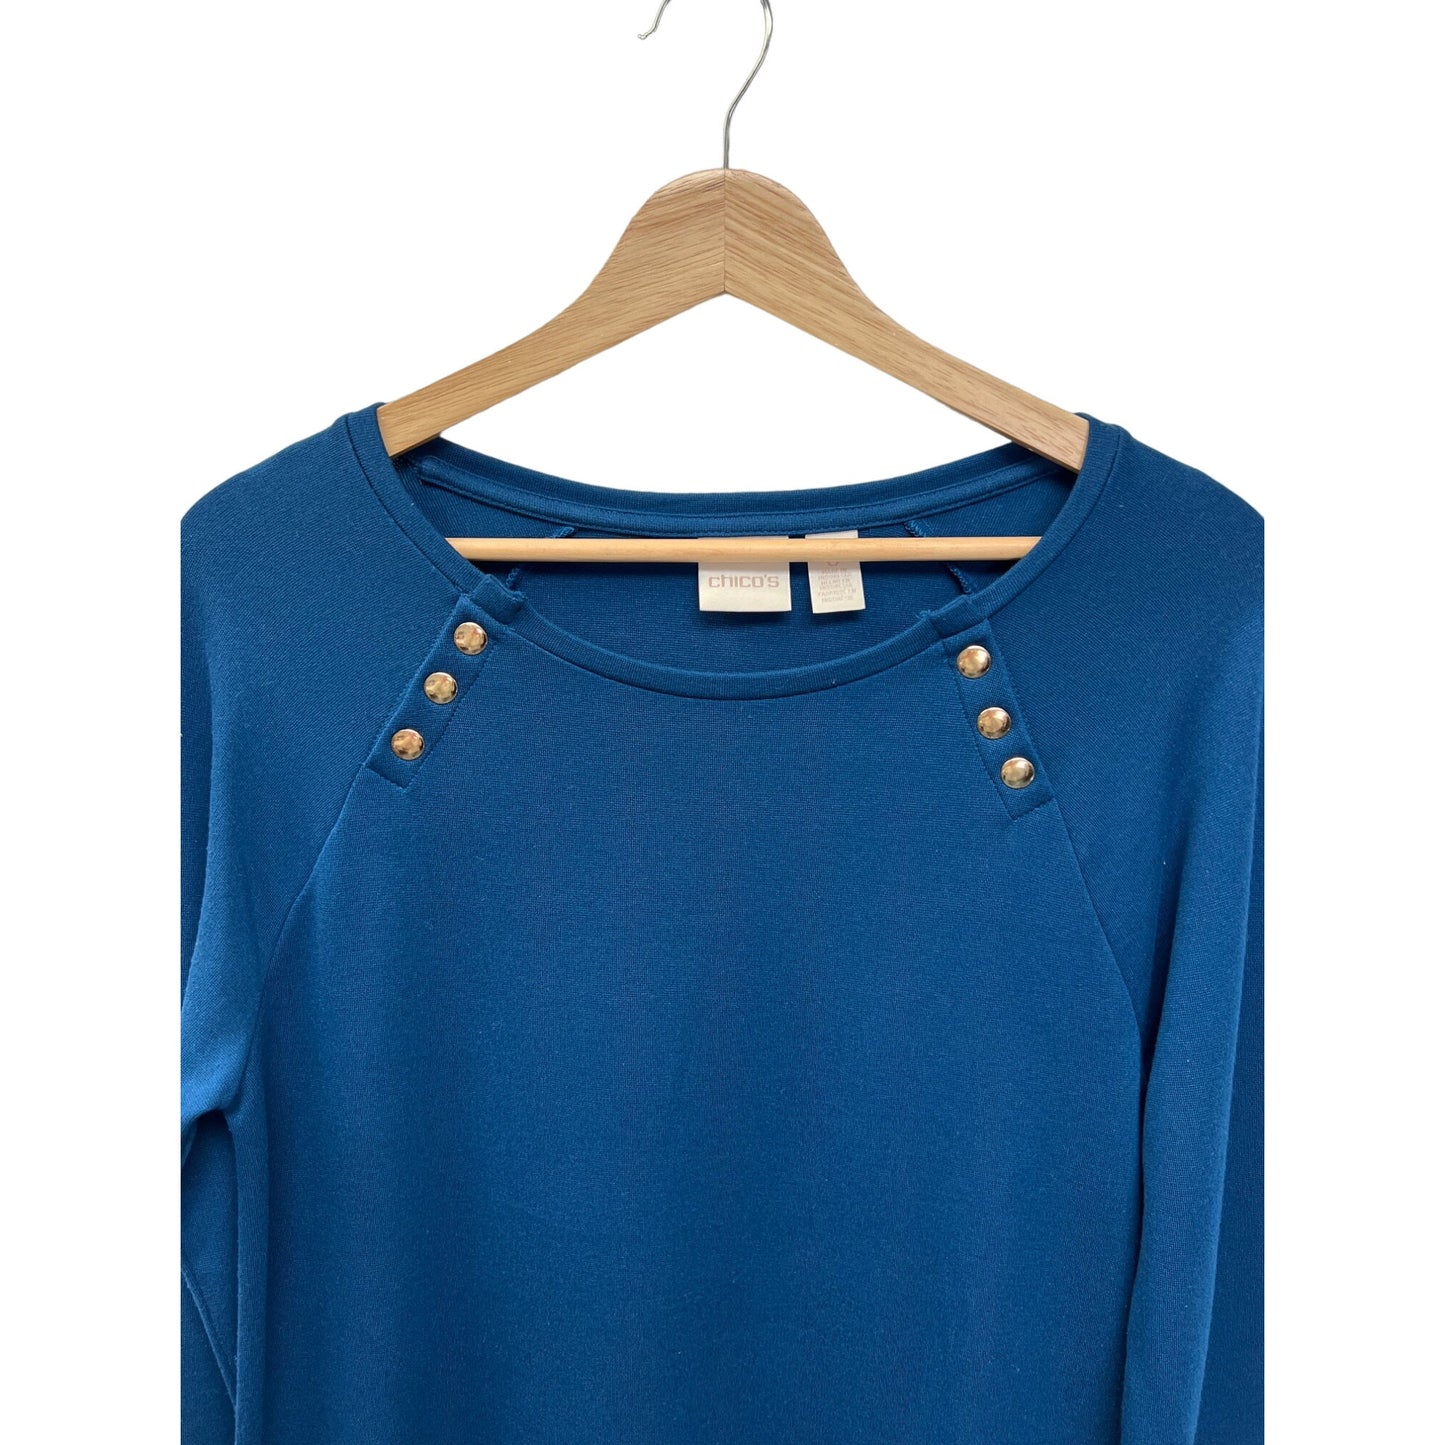 Chico's Soft Knit Blue Sweater with Gold Buttons